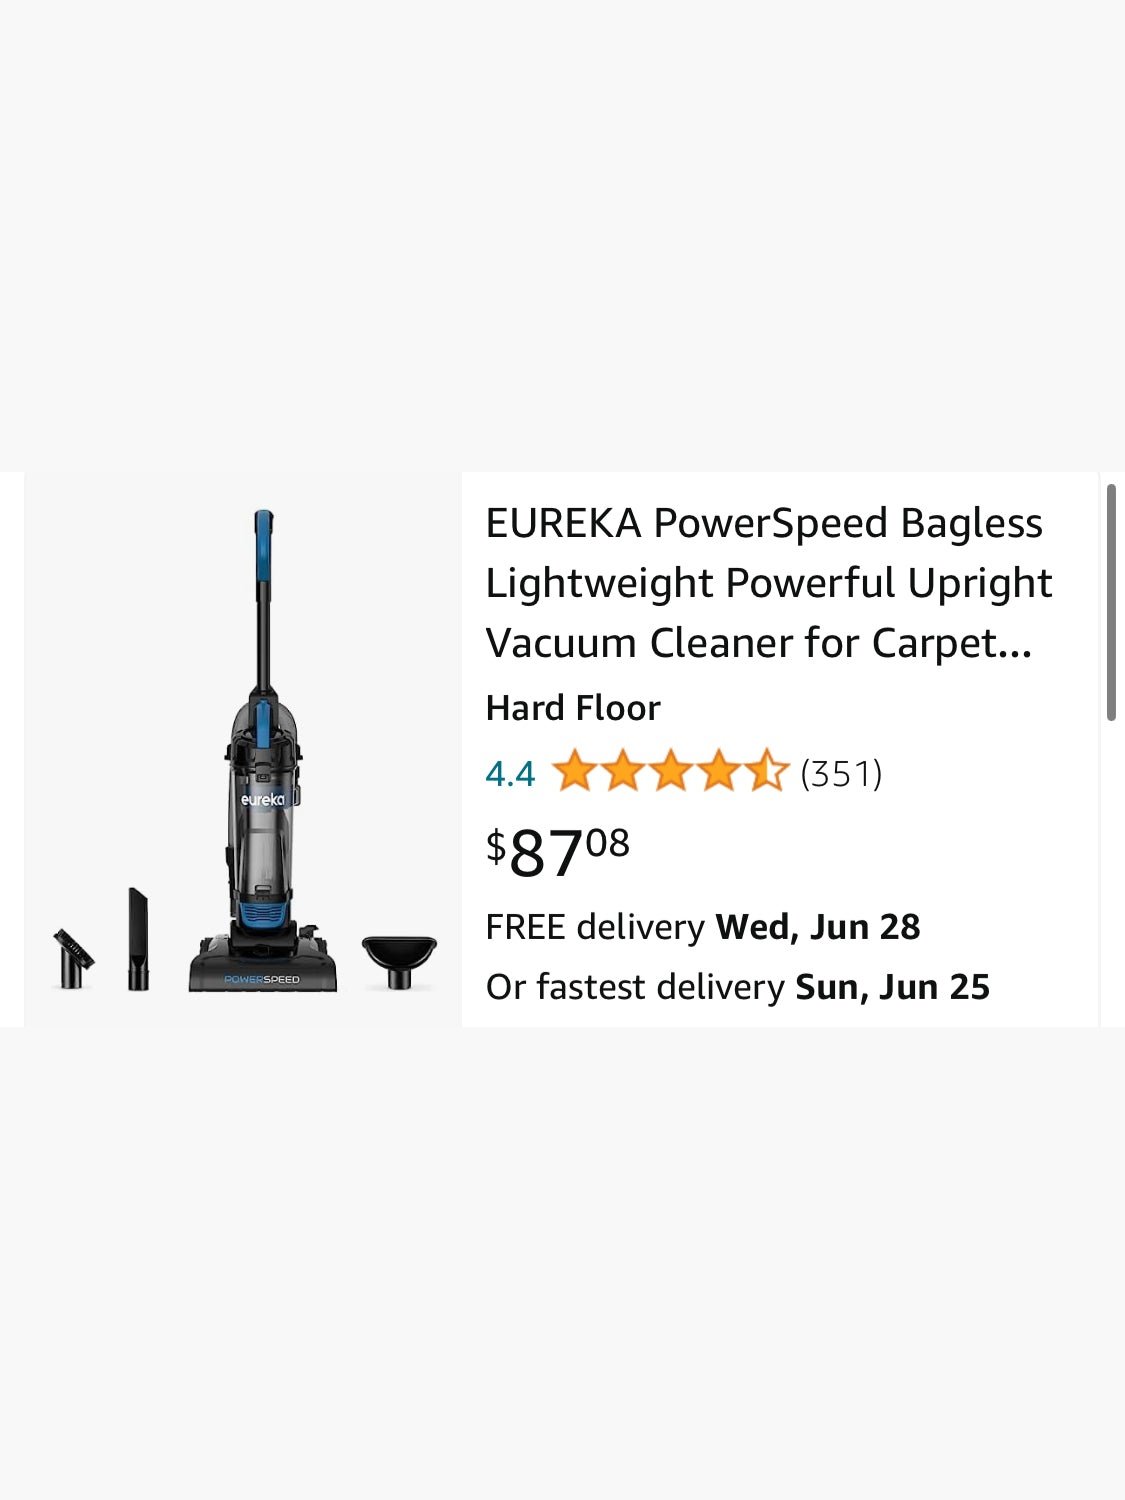 EUREKA PowerSpeed Bagless Lightweight Powerful Upright Vacuum Cleaner for Carpet and Hard Floor, Blue